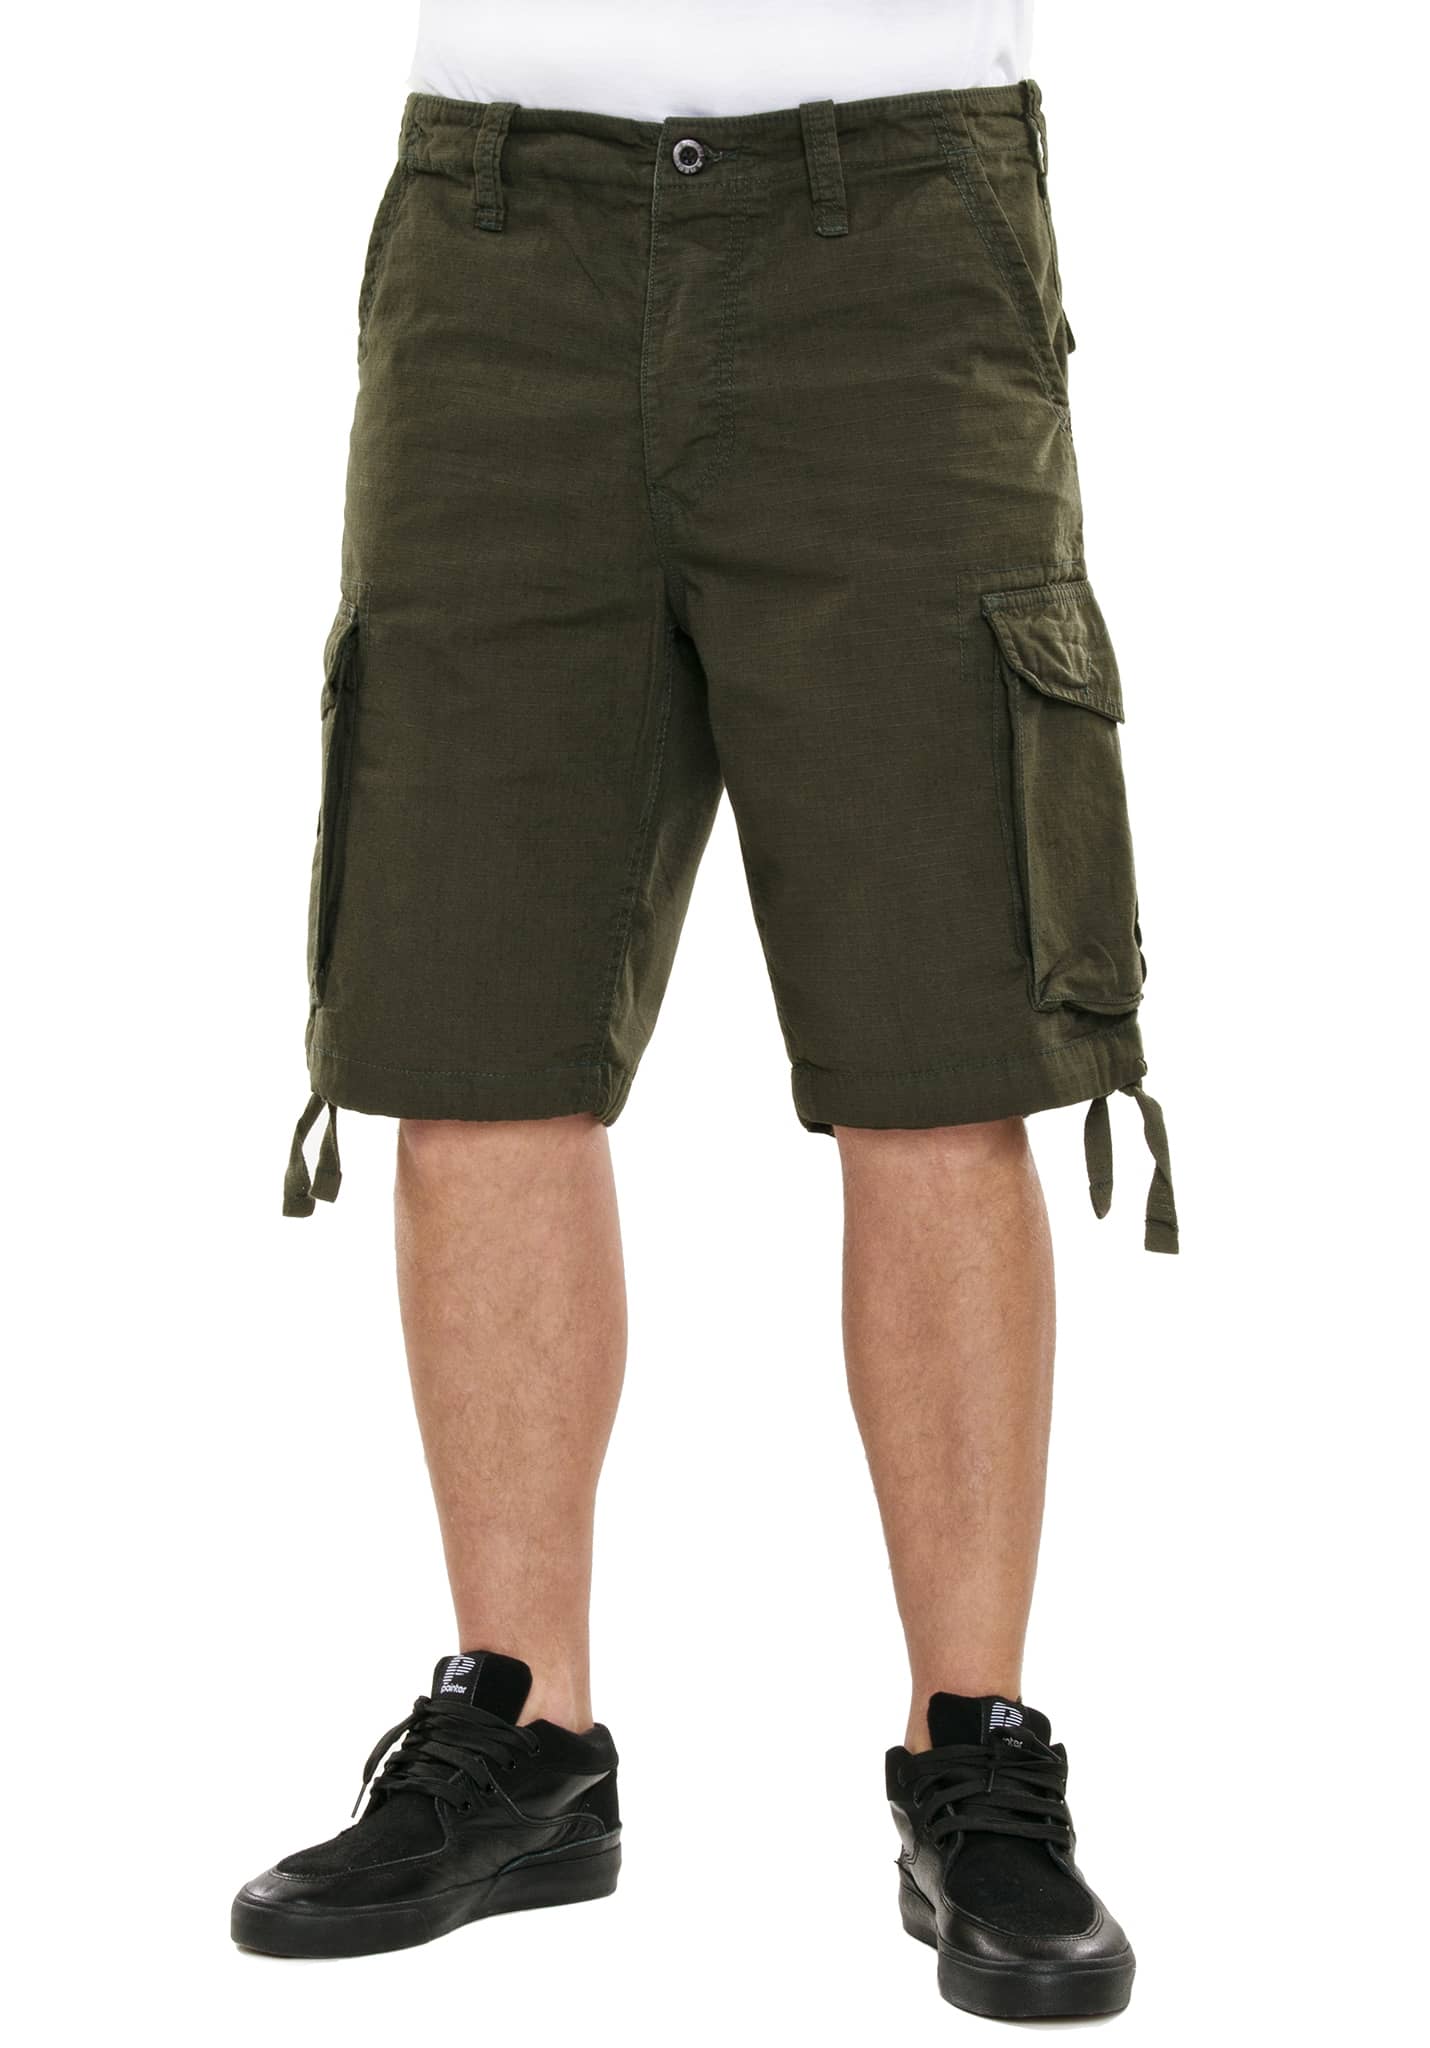 Reell New Cargo Shorts forest green 40/XX